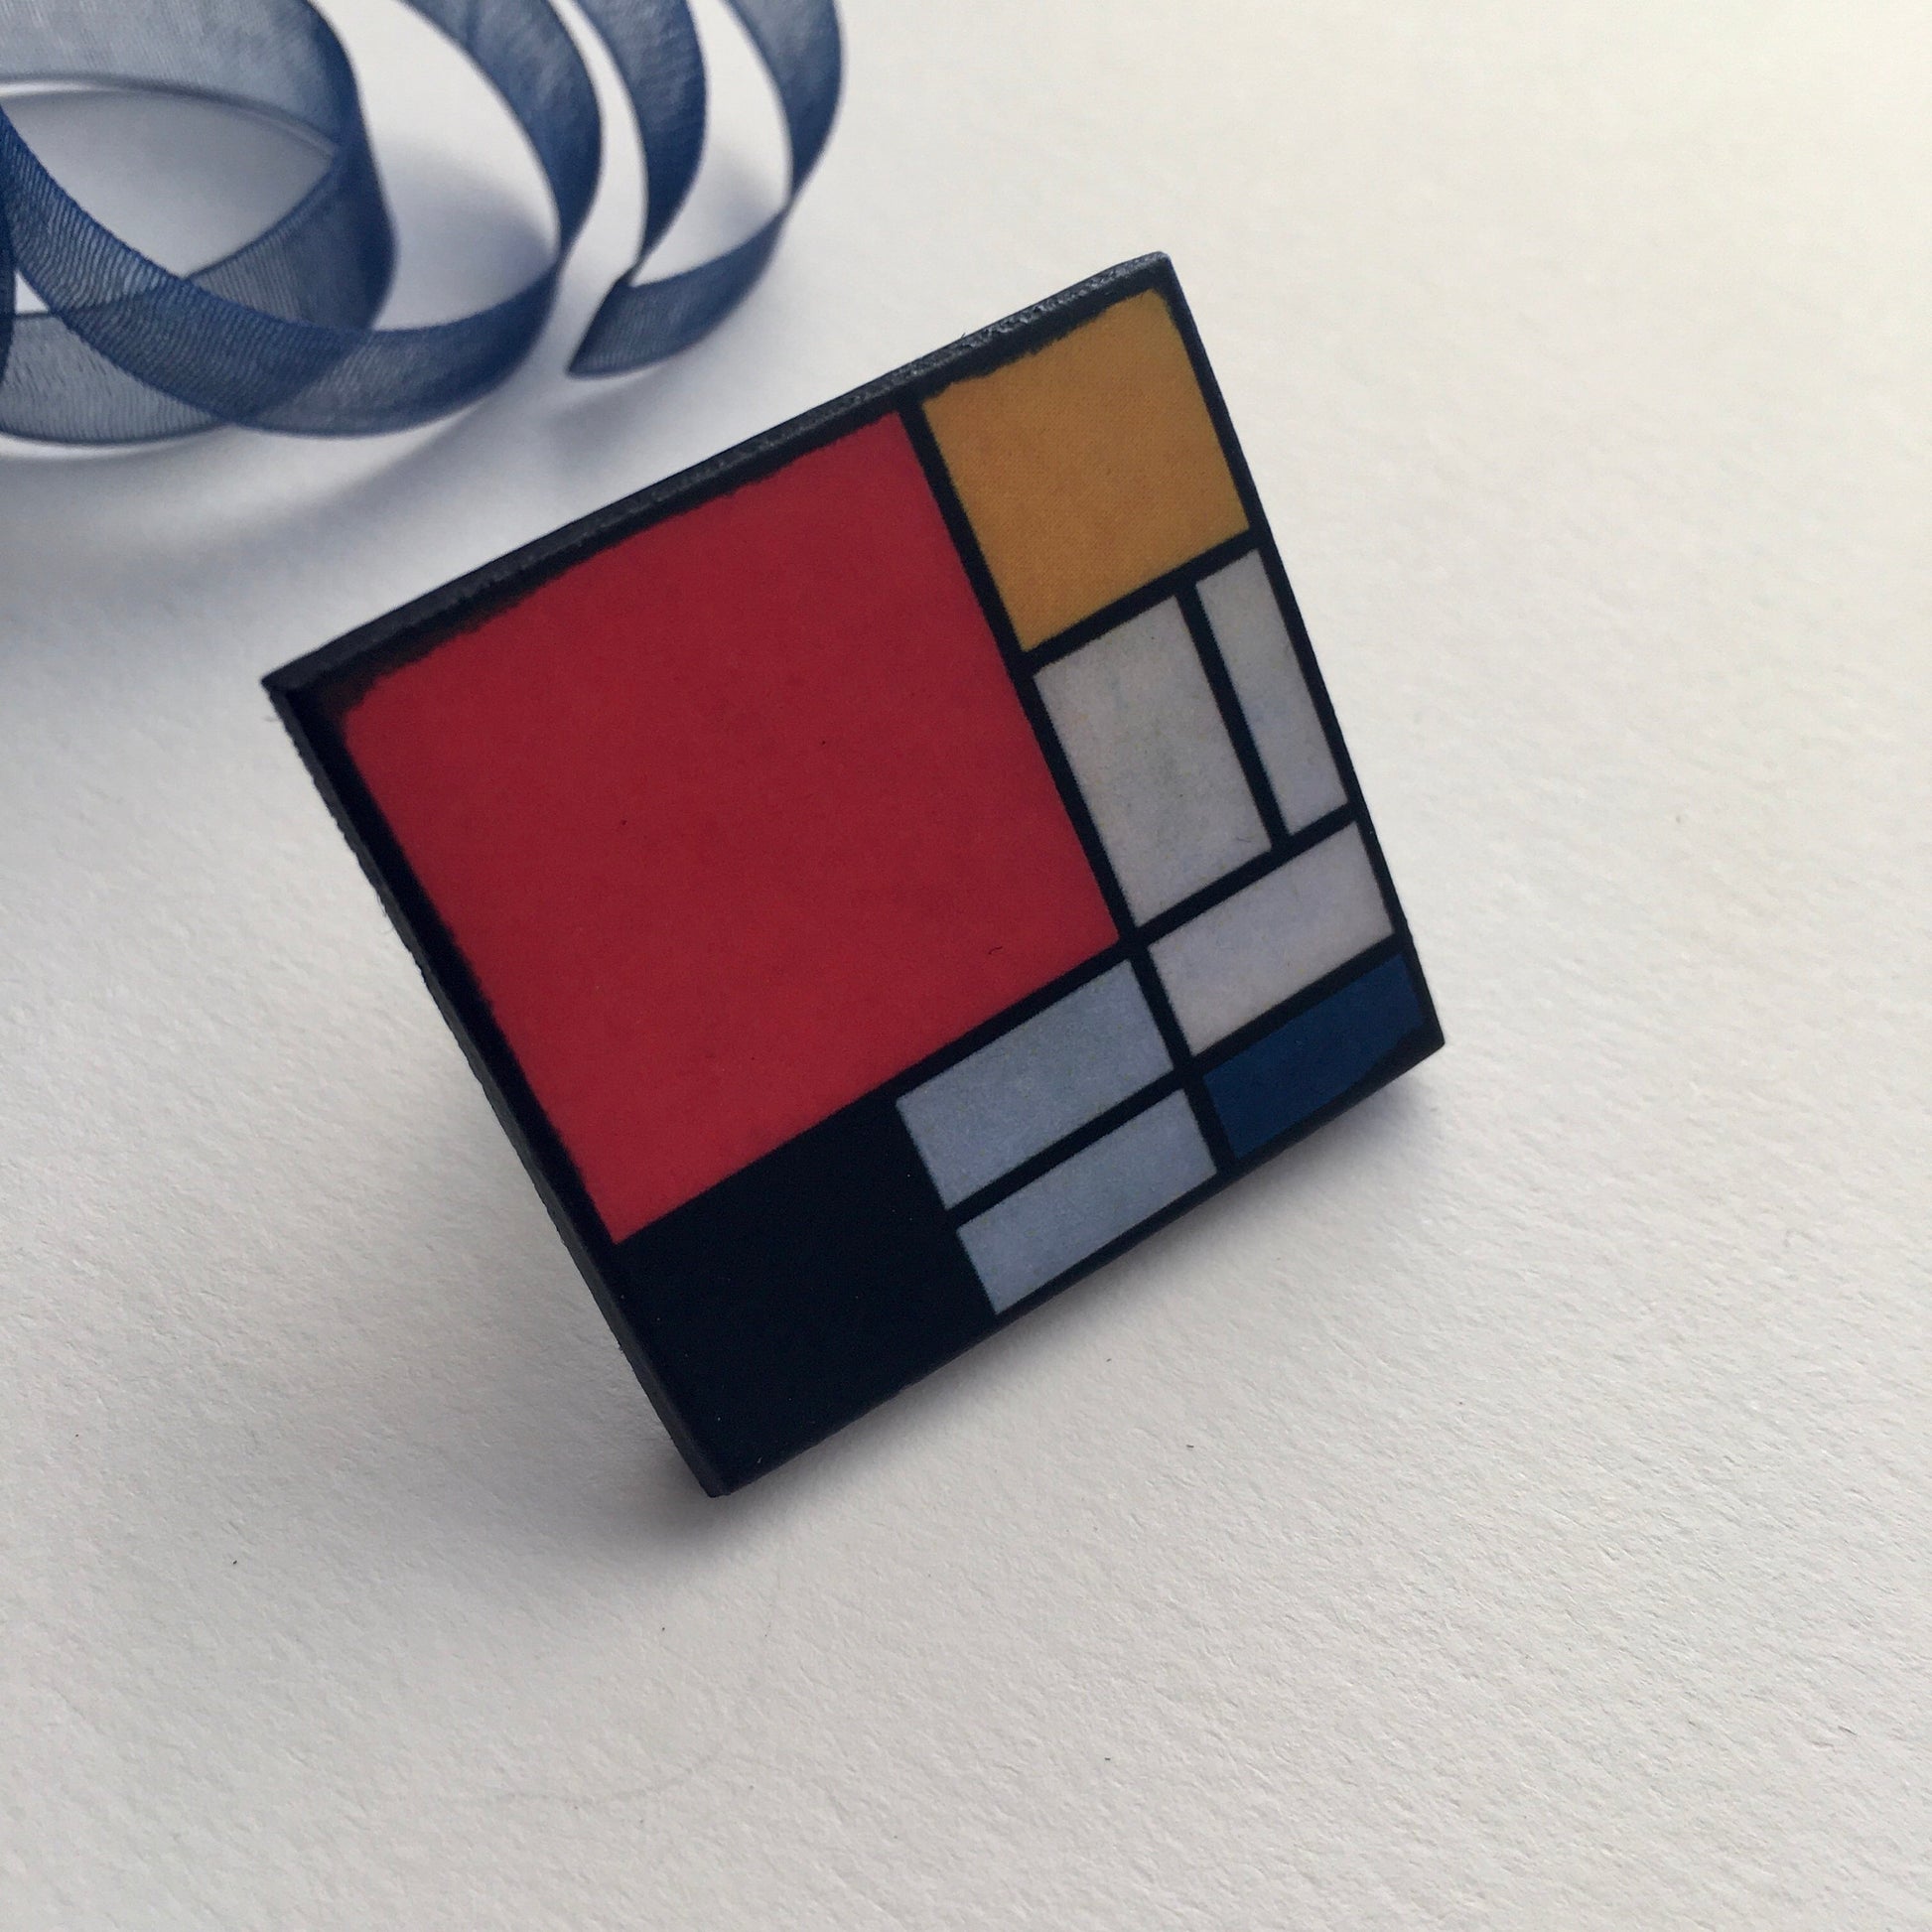 Wooden, 3.5 cm squared geometric art ring in red, blue, yellow and white colors. Obljewellery shop is inspired by Mondrian's De Stijl period works.